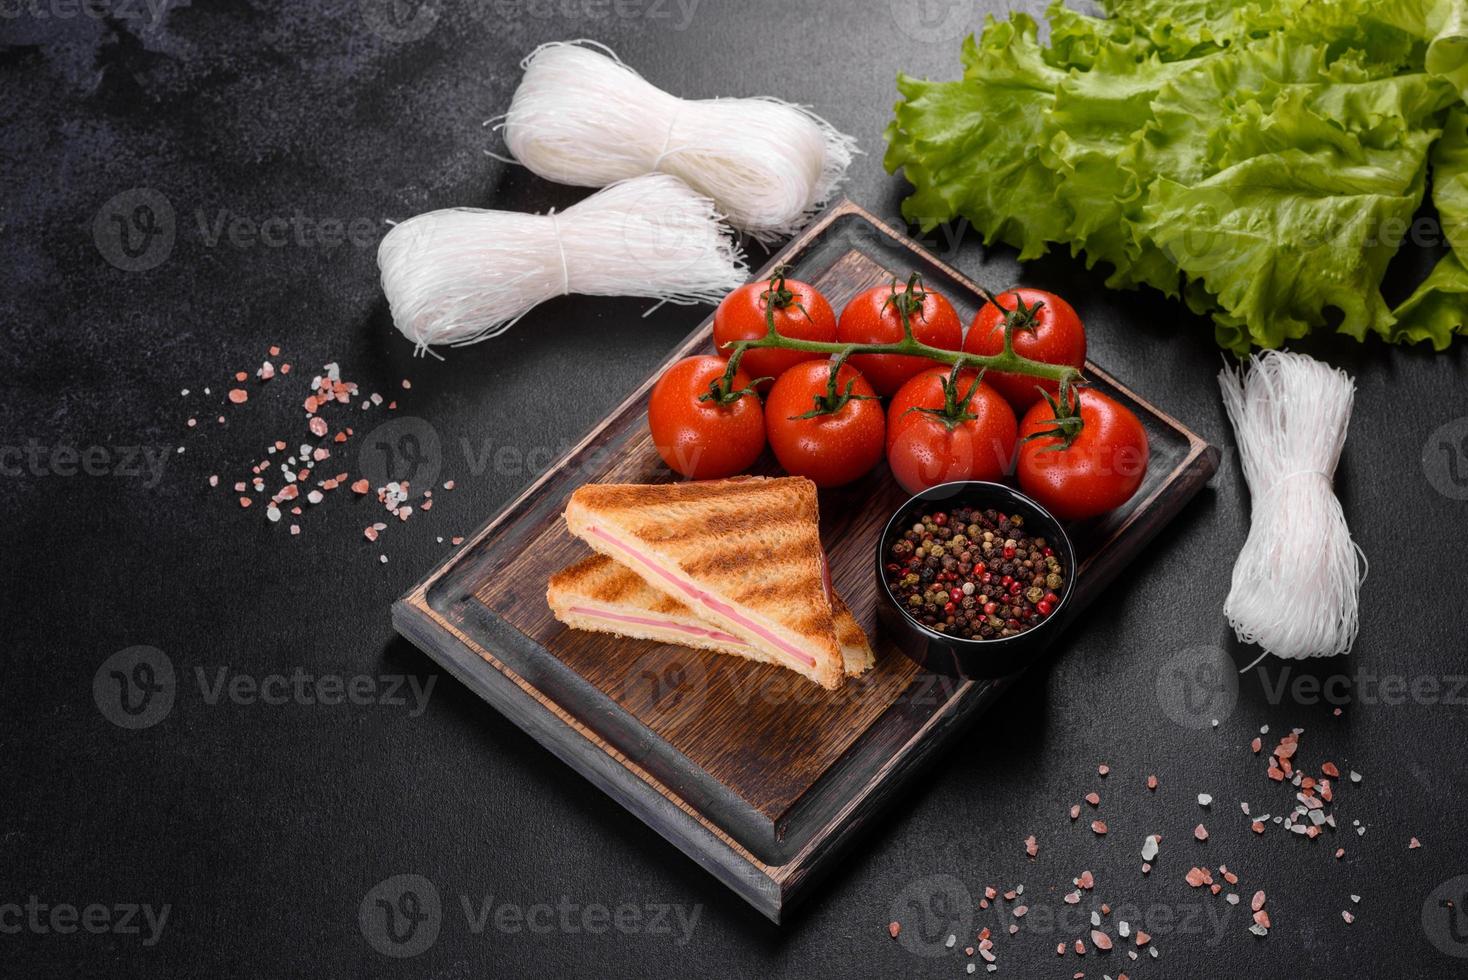 Sandwich with ham, cheese, tomatoes, lettuce, and toasted bread photo